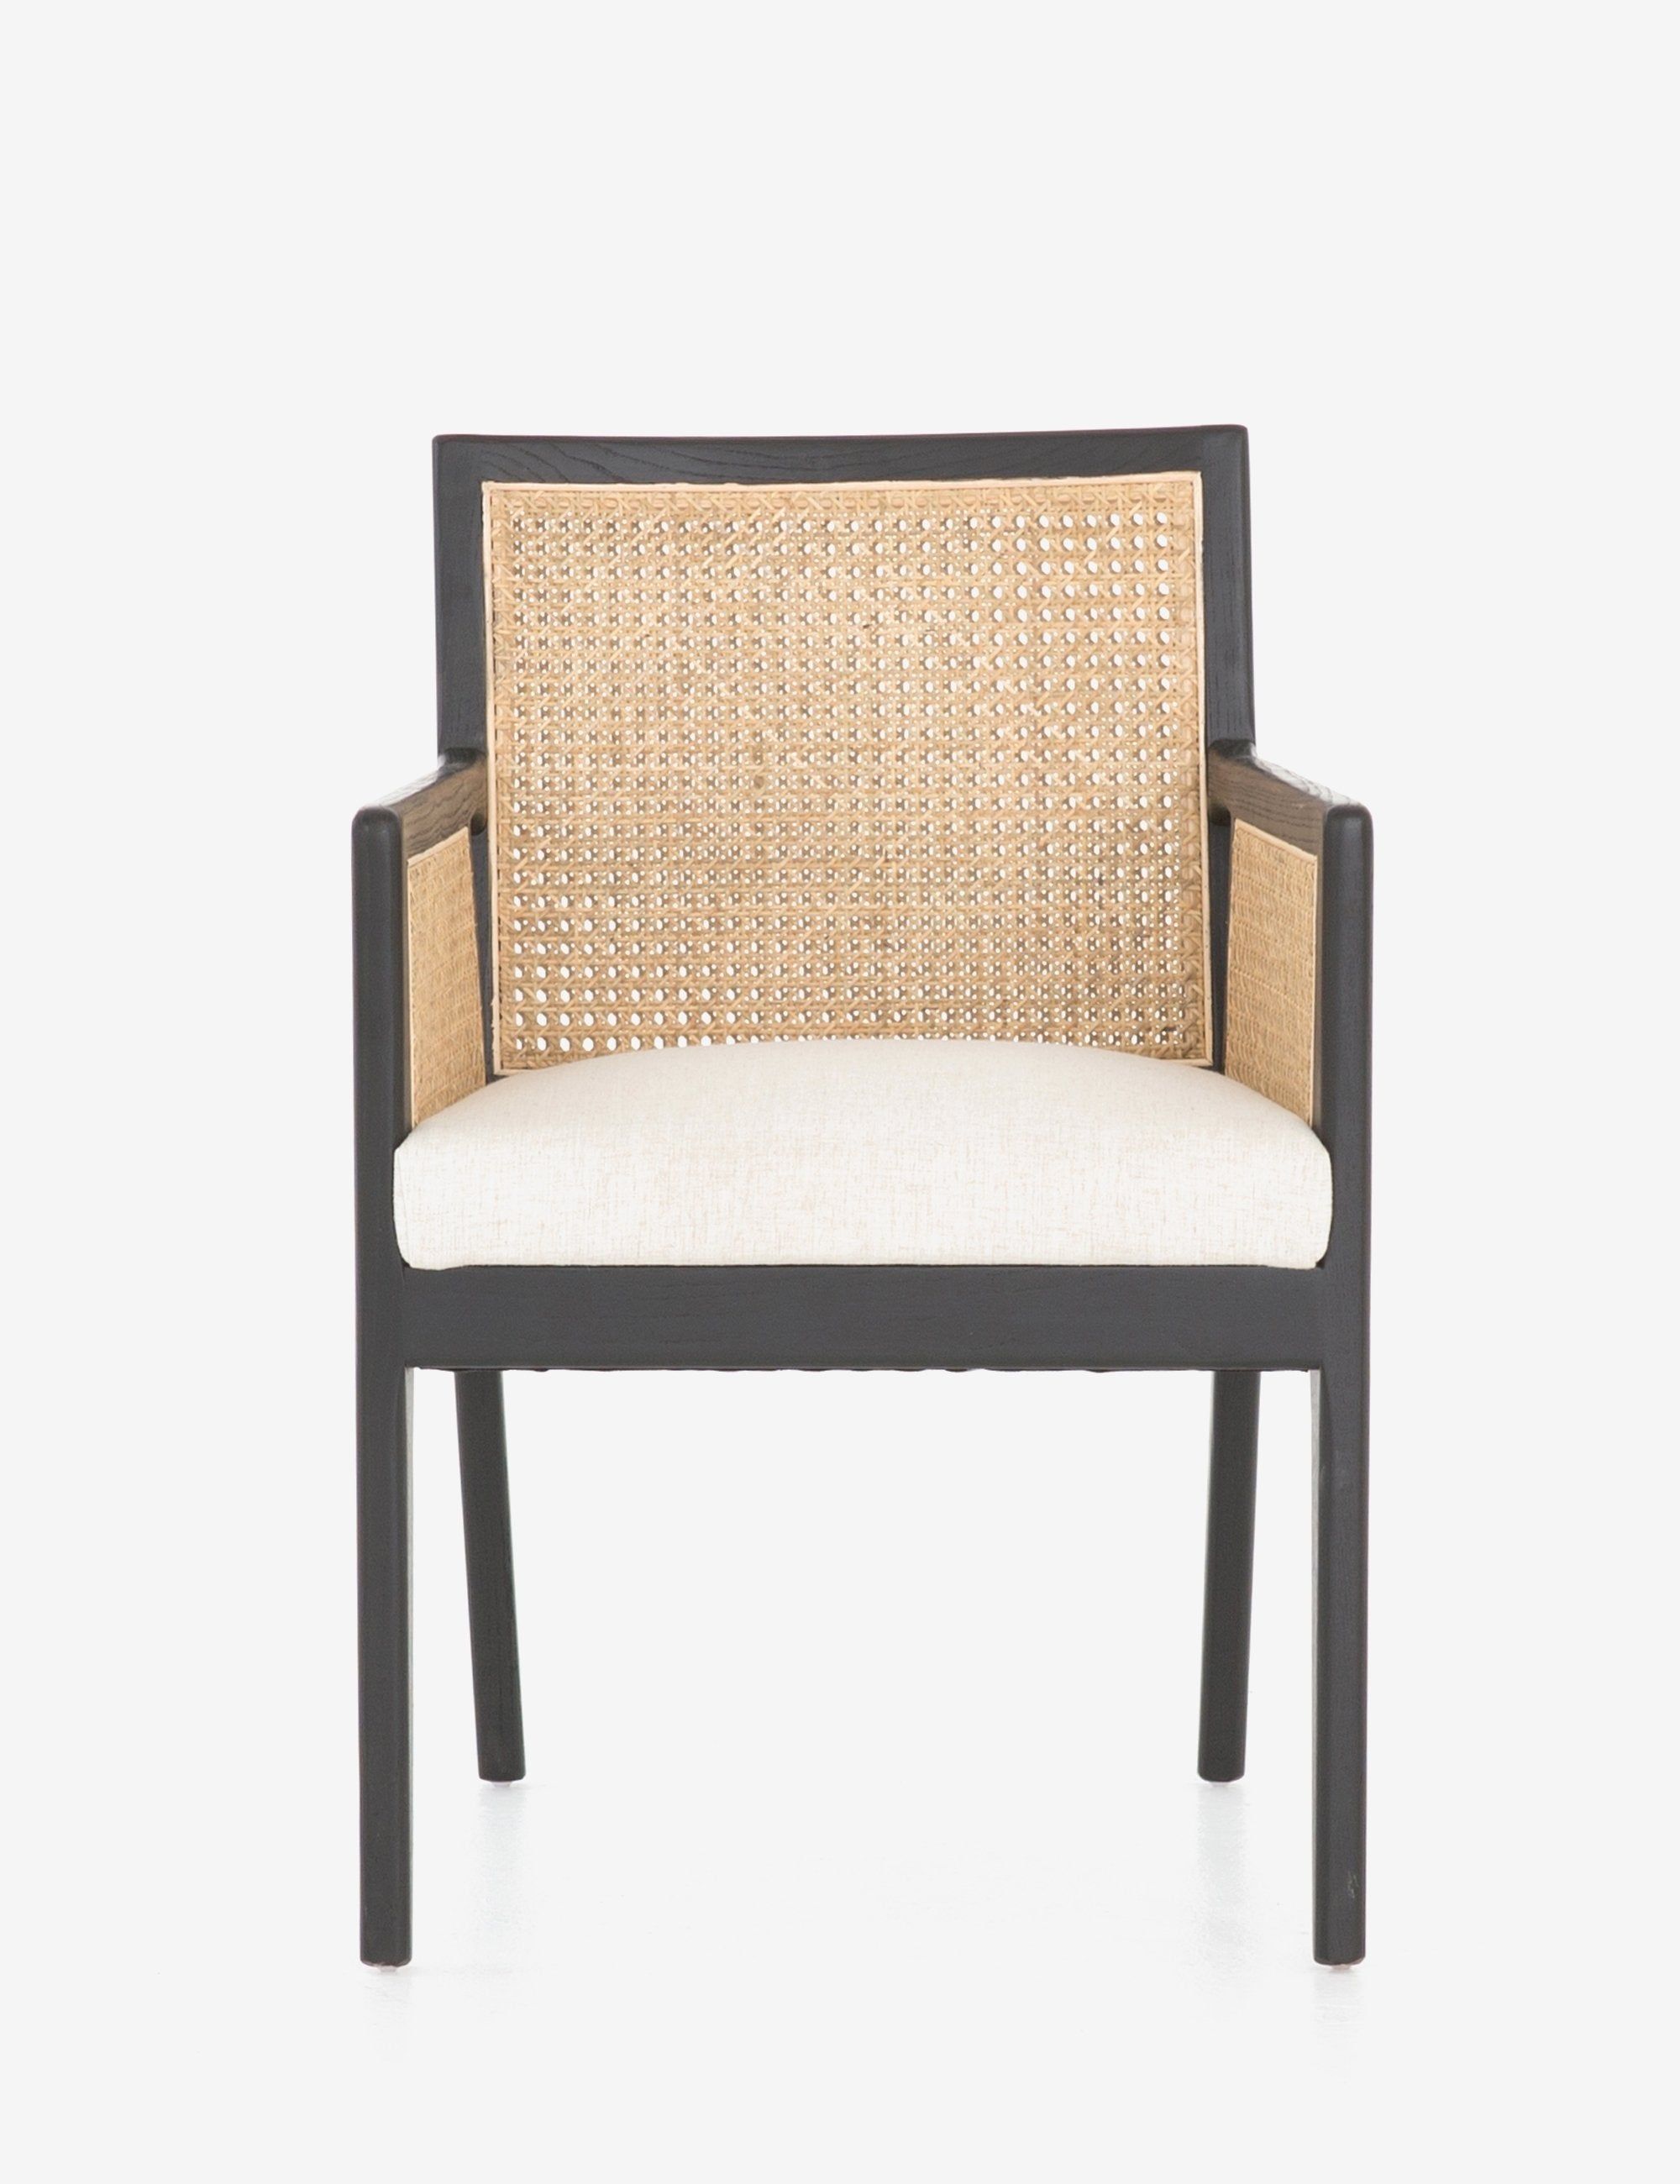 Savile Flax Linen & Cane Upholstered Arm Chair in Brushed Ebony